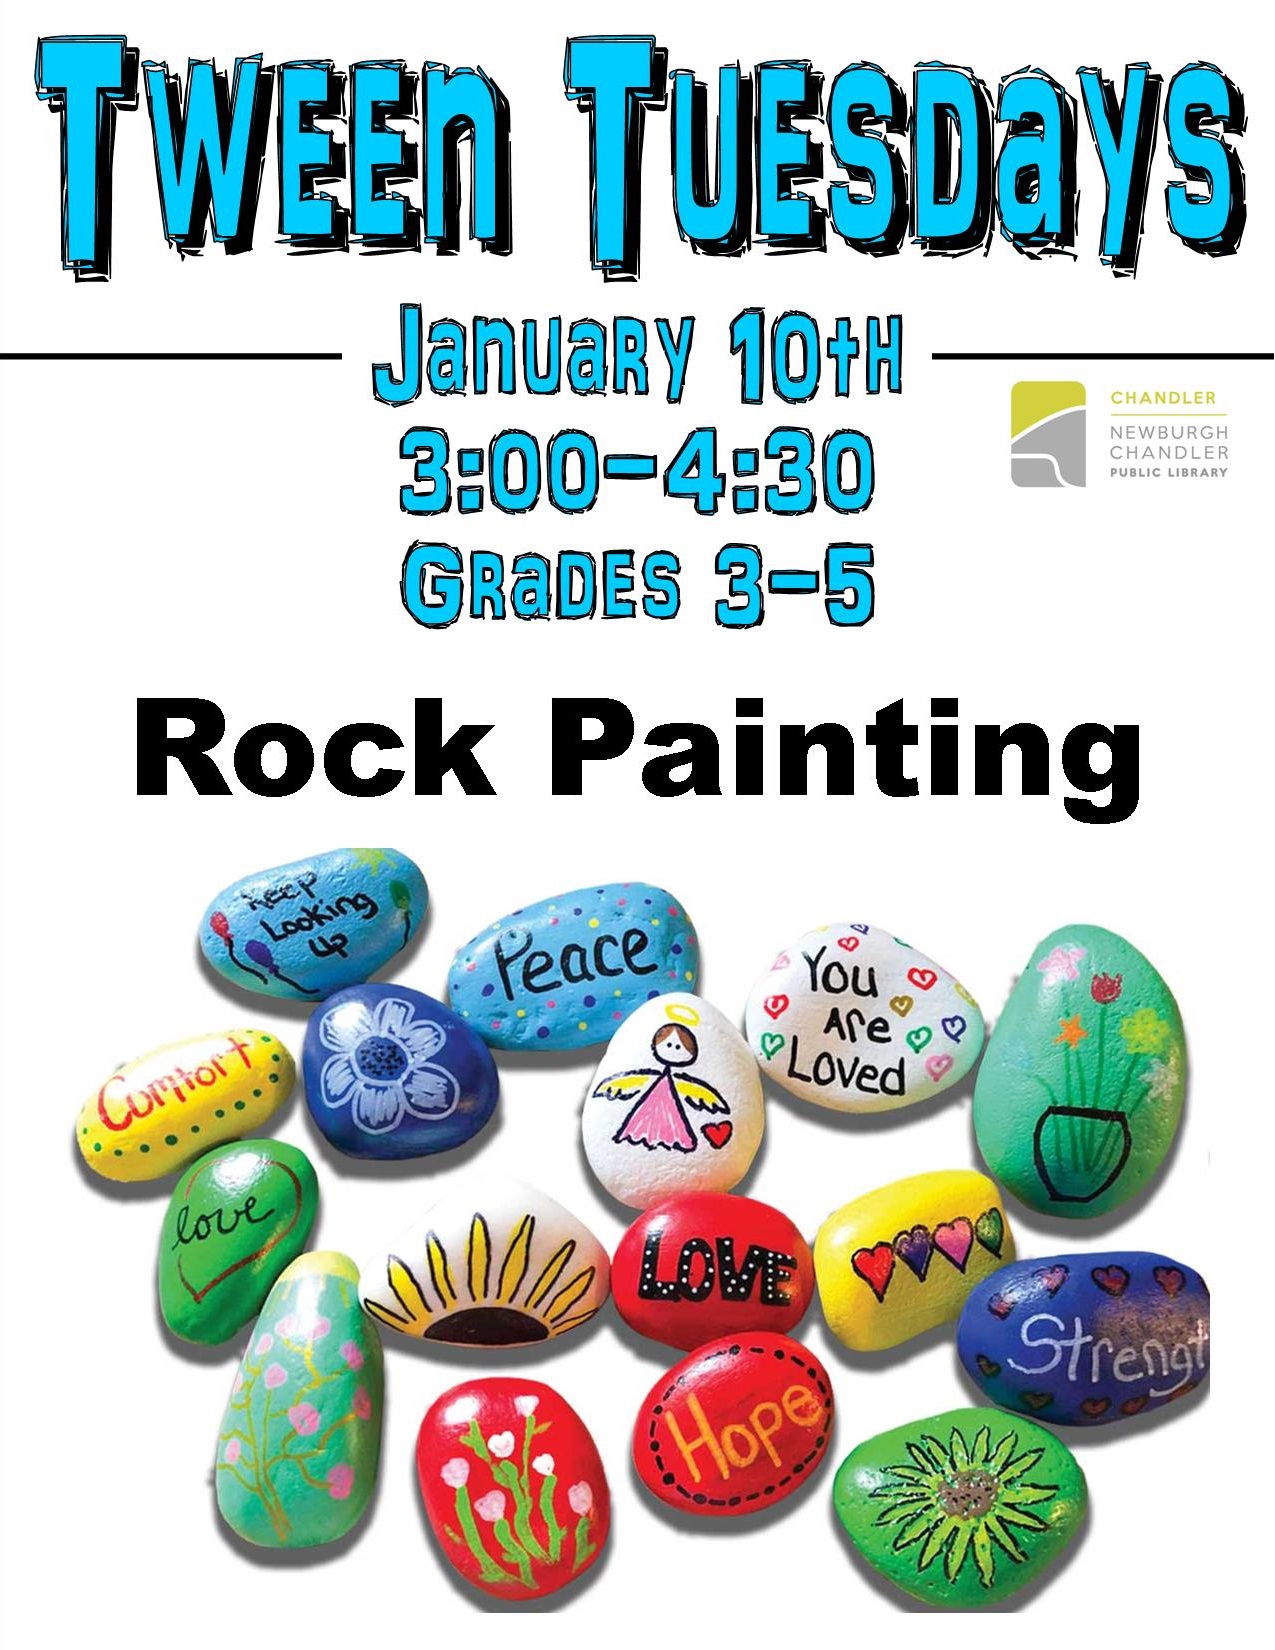 Tween Tuesdays: Rock Painting @ Chandler Library Children's Department | Chandler | Indiana | United States